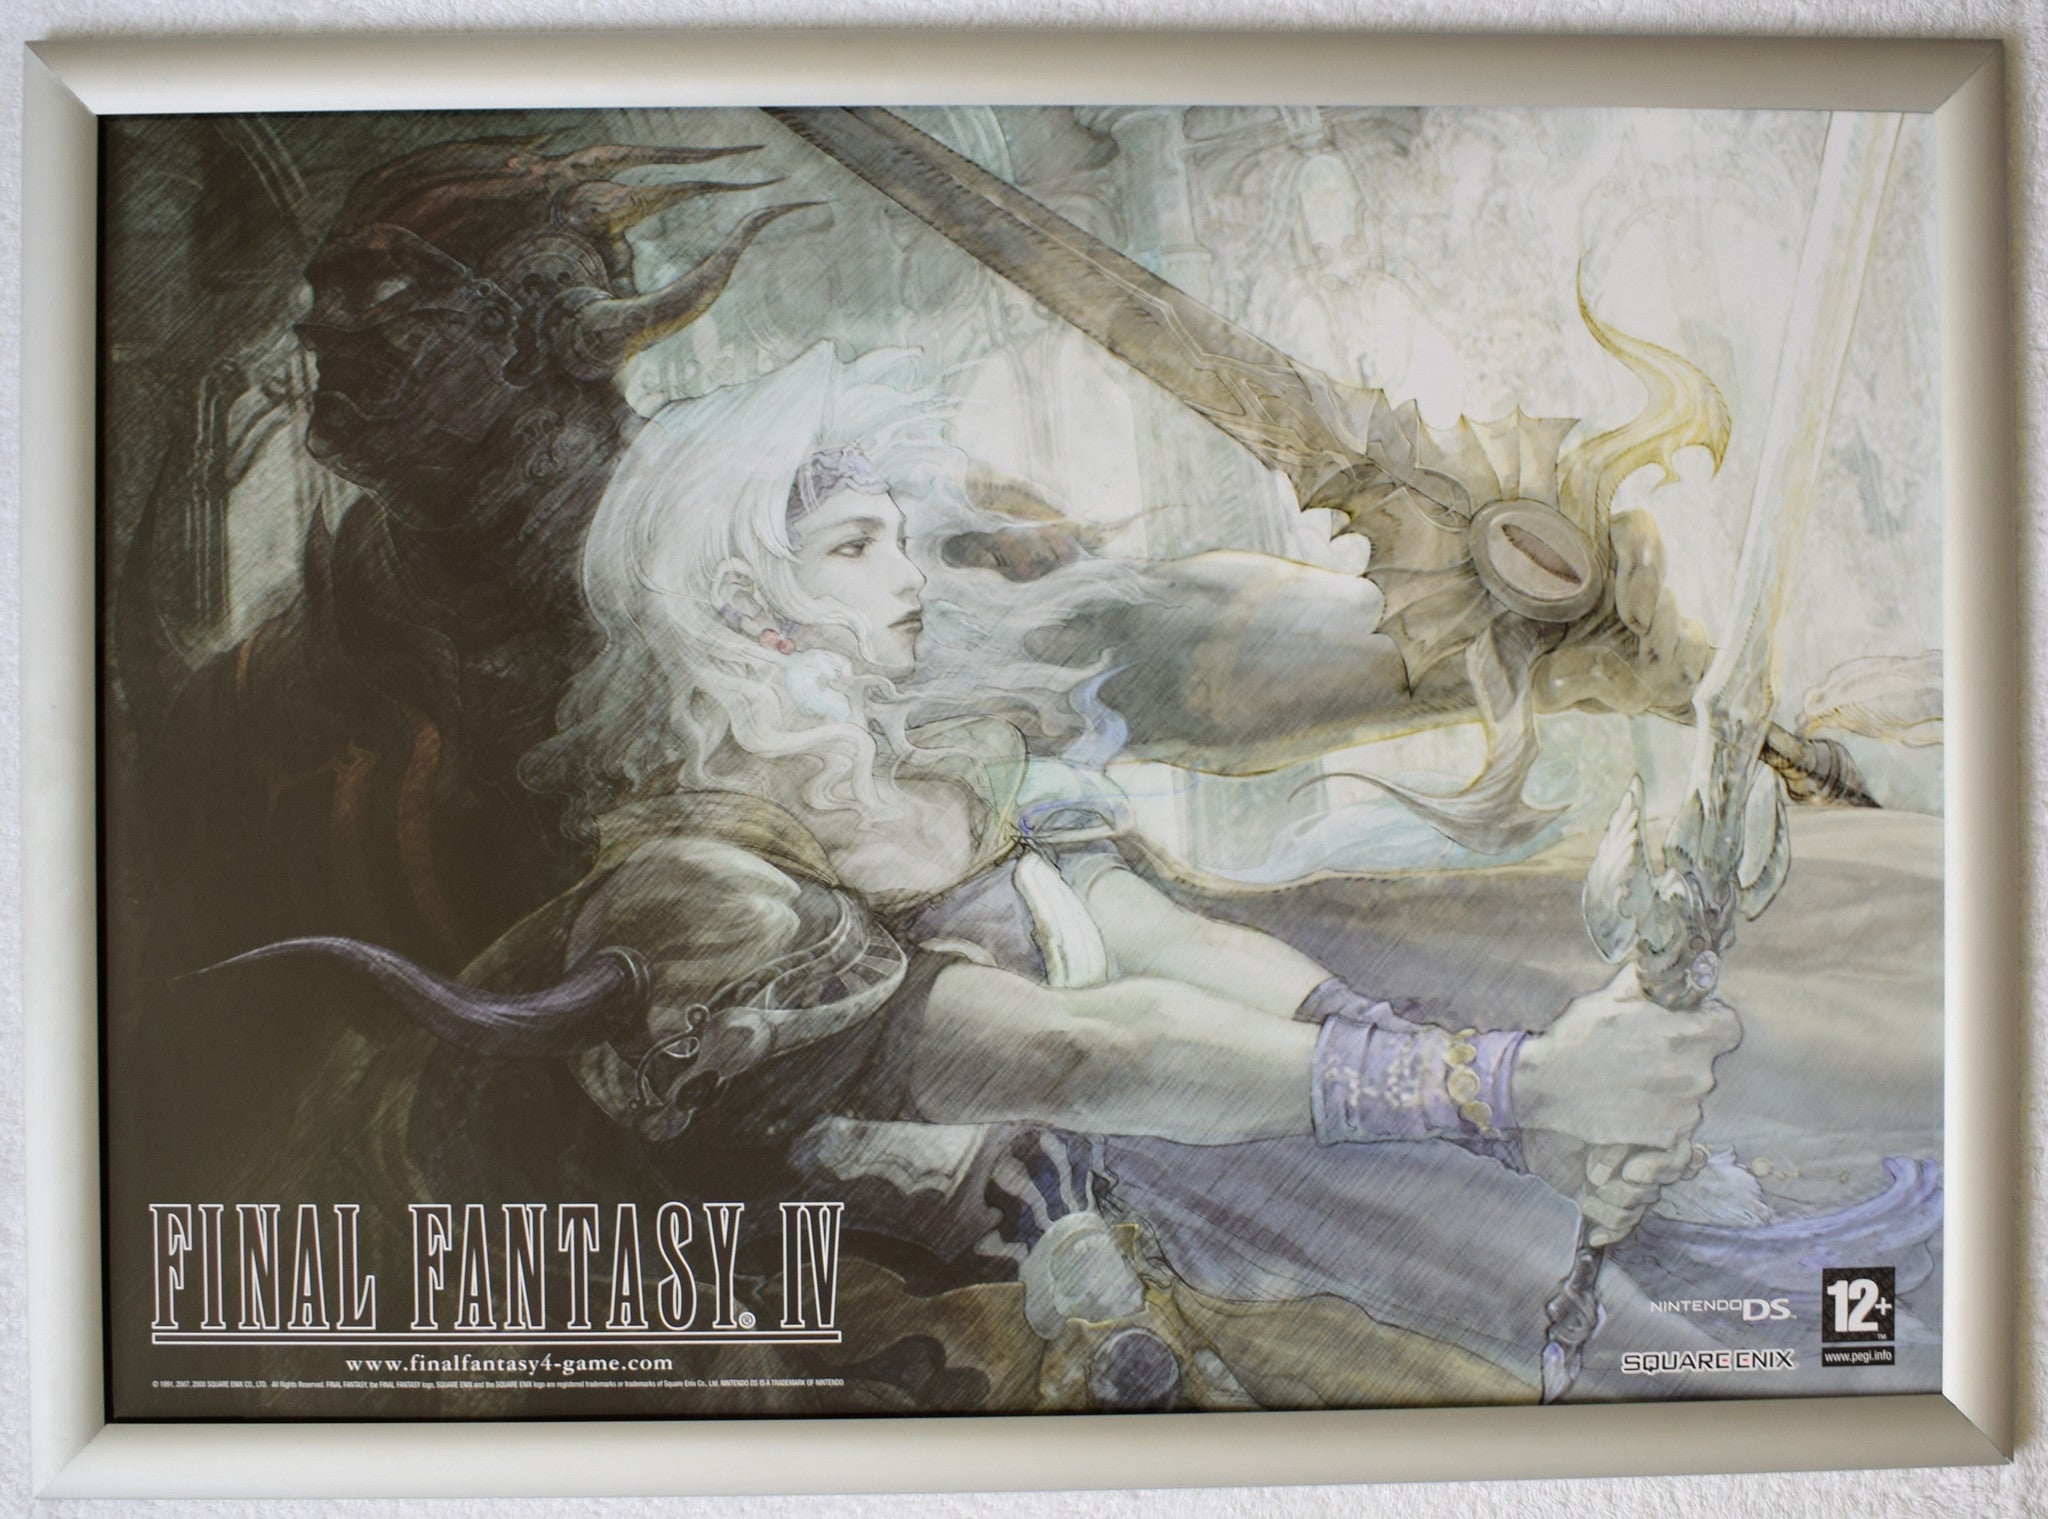 Final Fantasy IV (A2) Promotional Poster #2